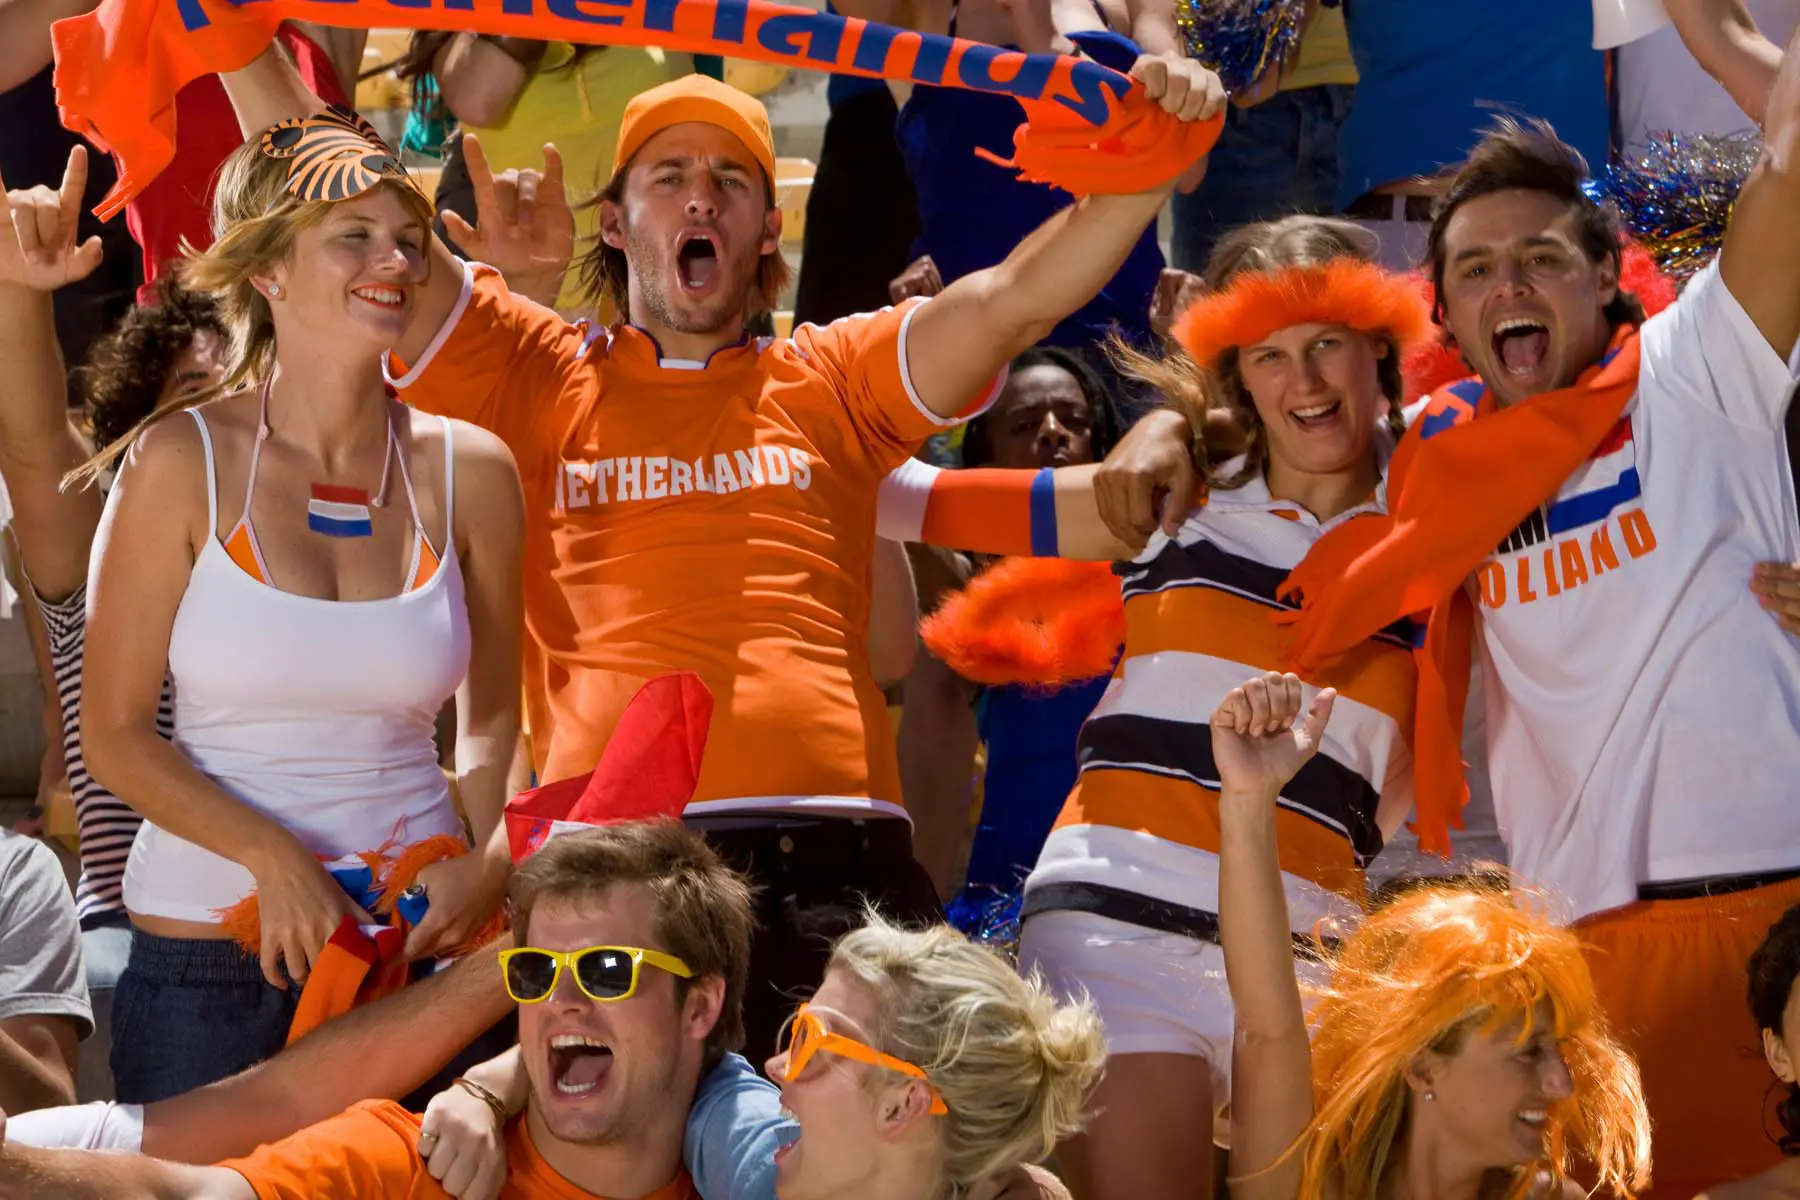 dutch fans in the stands